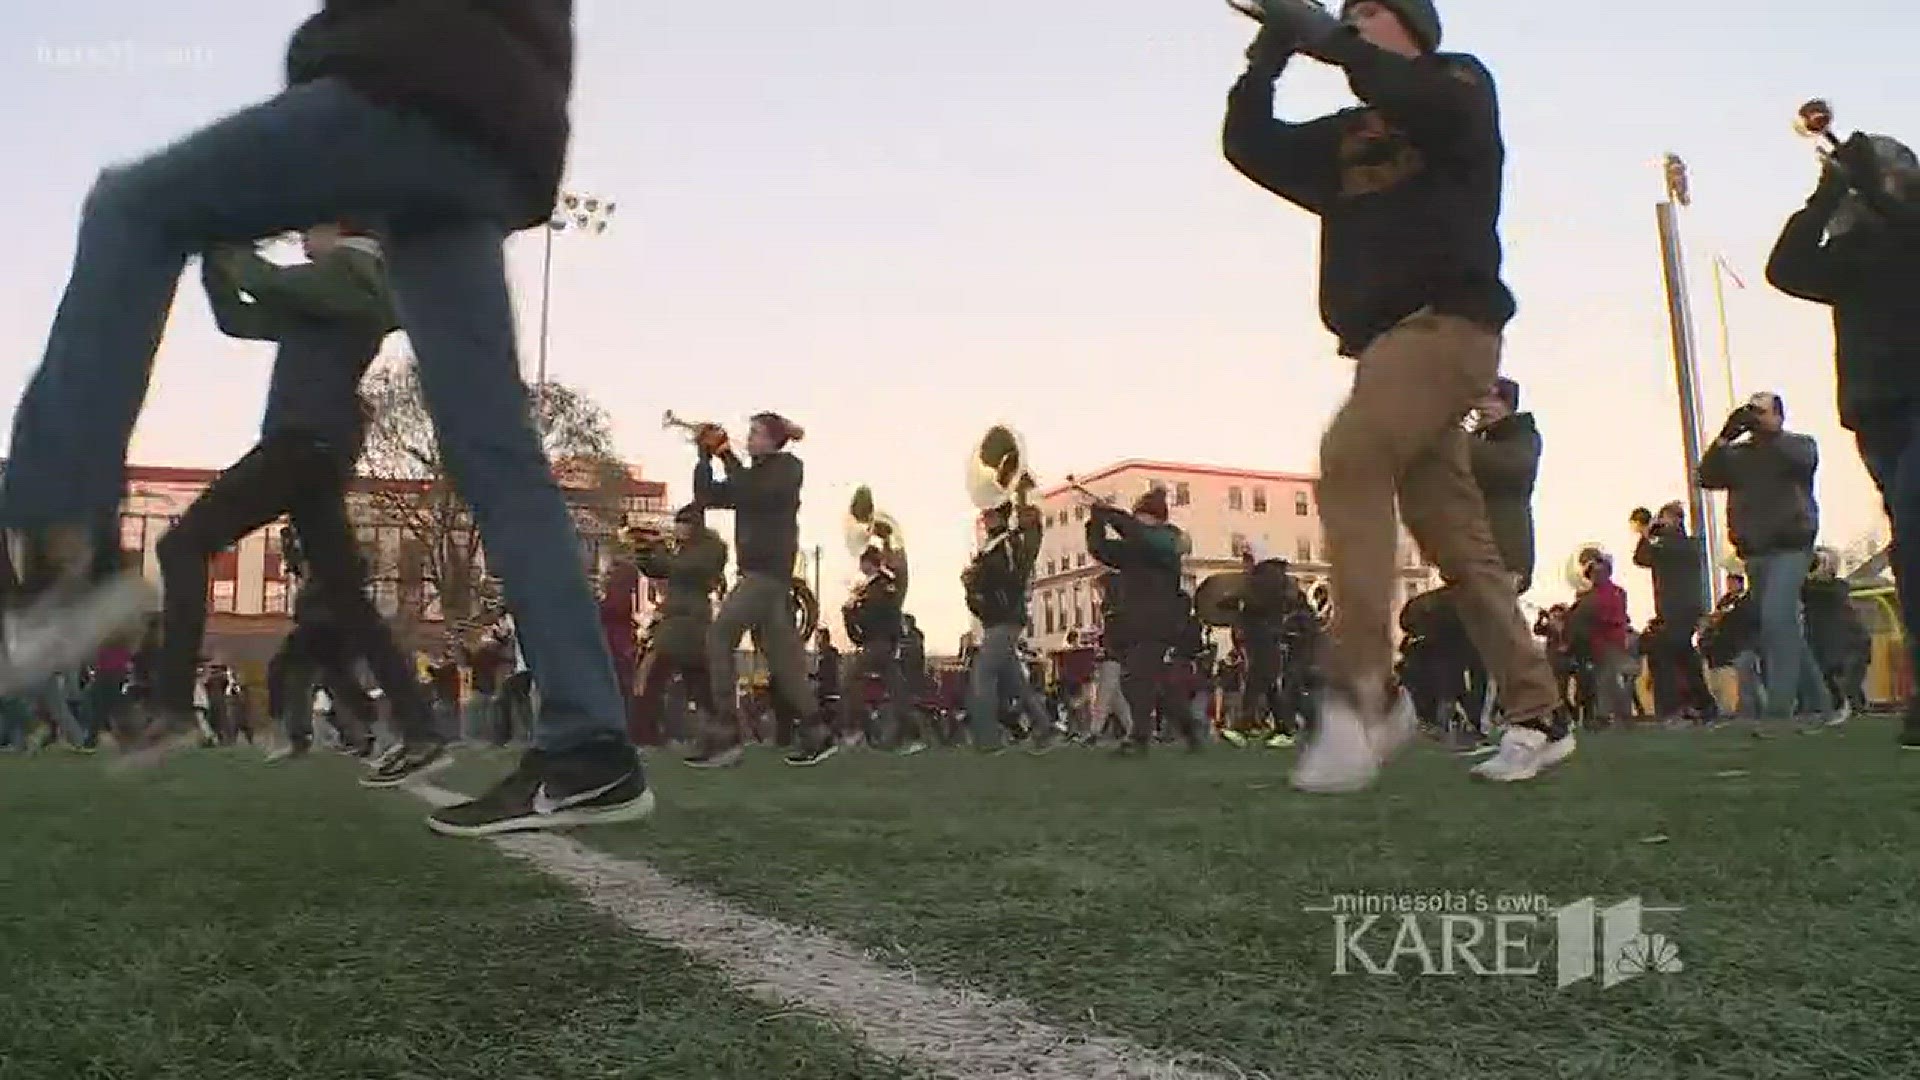 U of M Marching Band hopes for Super Bowl halftime glory